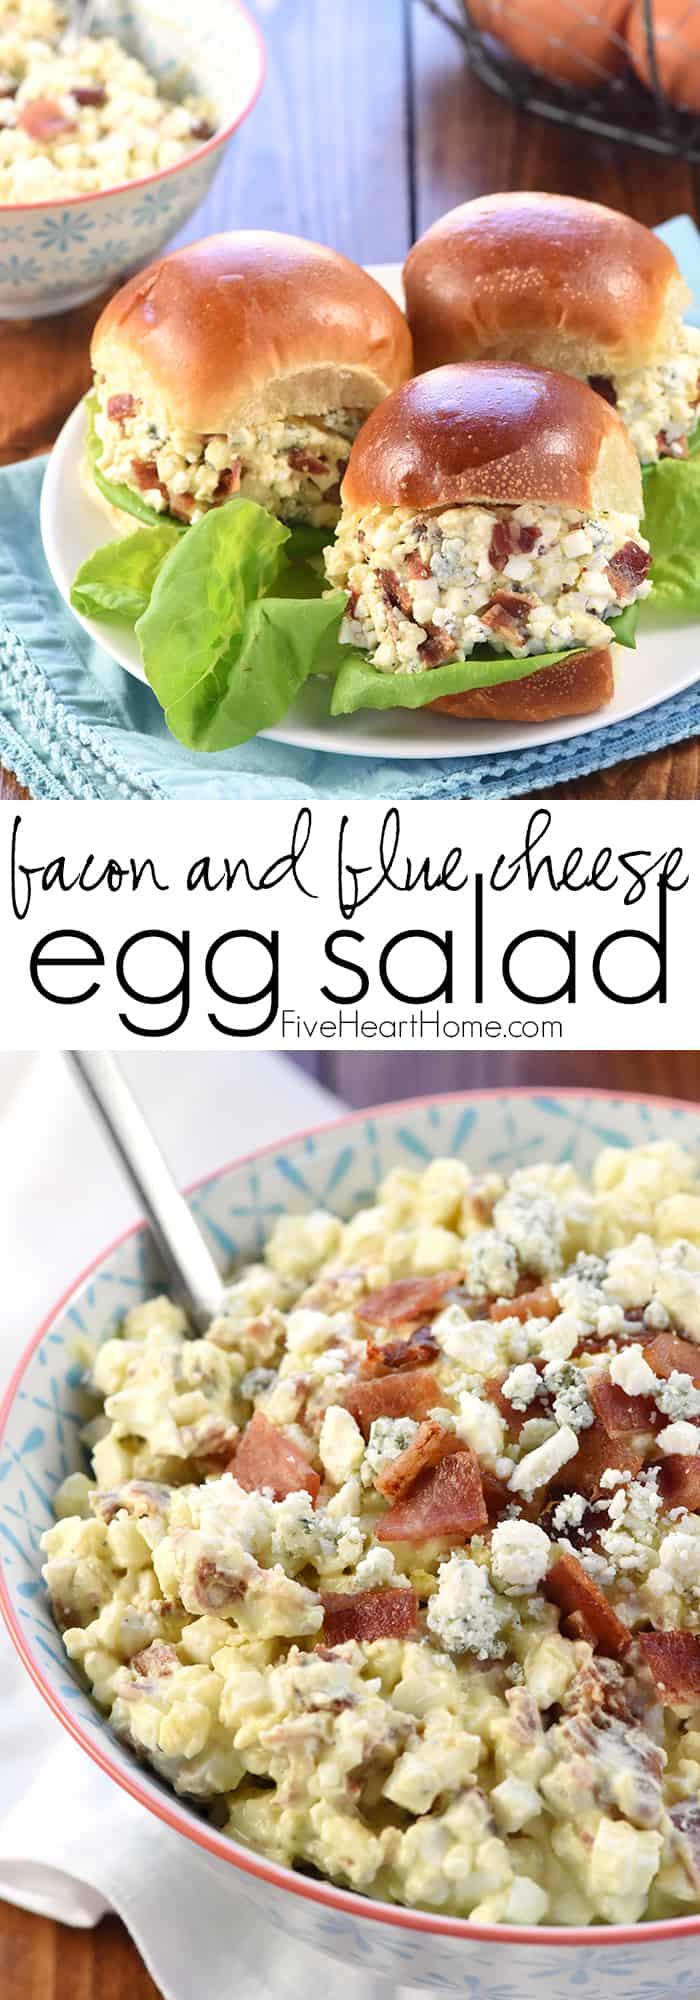 Egg Salad with Bacon and Blue Cheese ~ a flavorful filling for sandwiches or lettuce wraps, and a great recipe for using up leftover hard-boiled Easter eggs! | FiveHeartHome.com via @fivehearthome